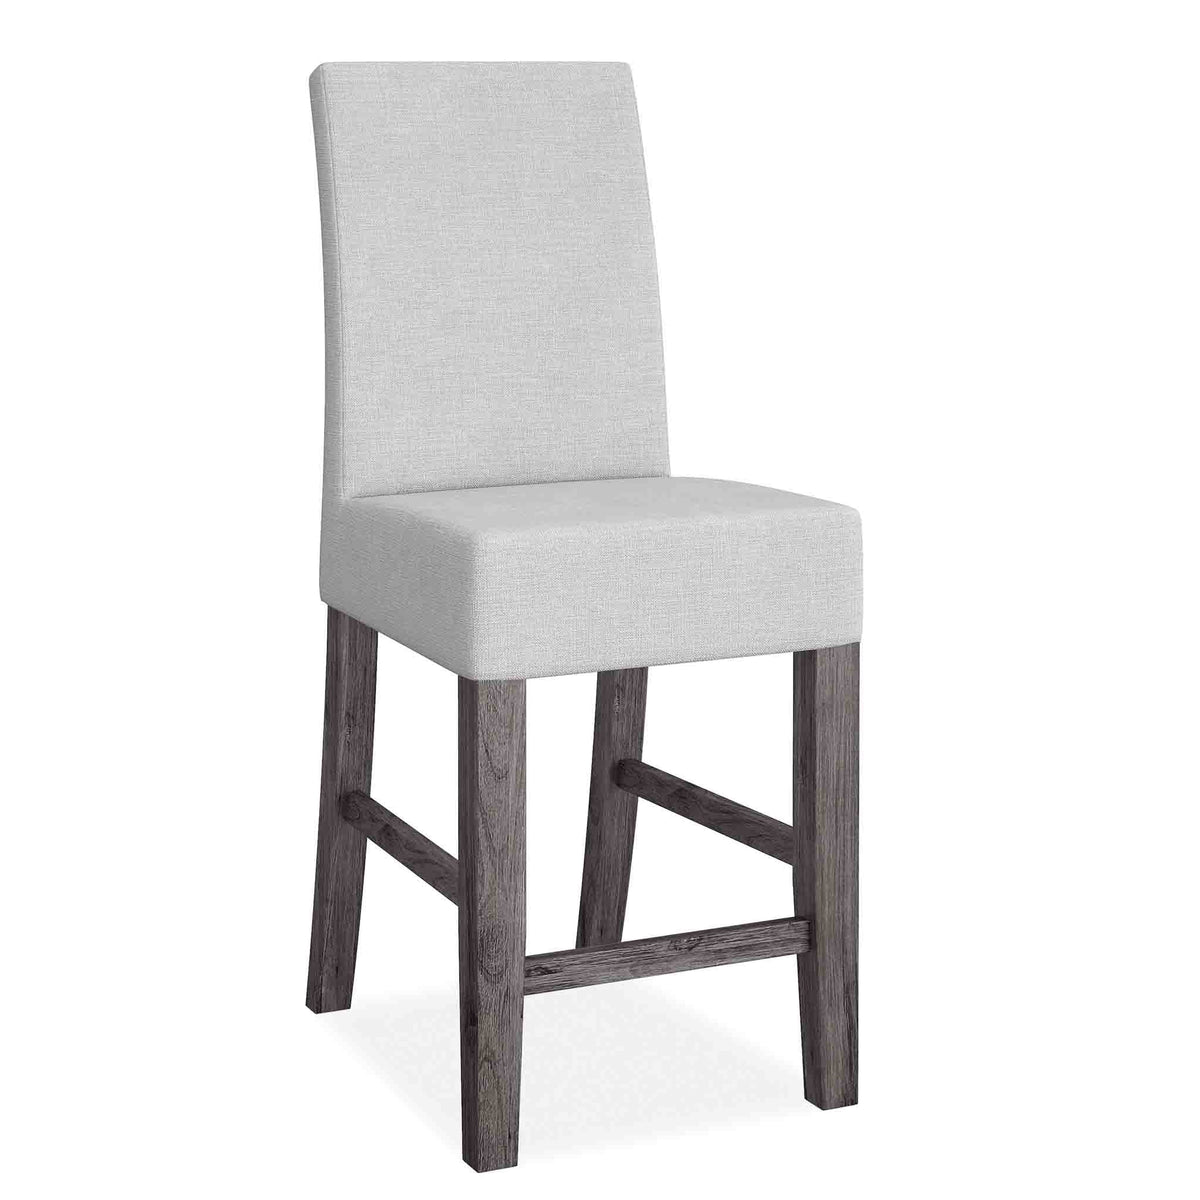 Saltaire Grey Industrial Bar Stool Chair from Roseland Furniture